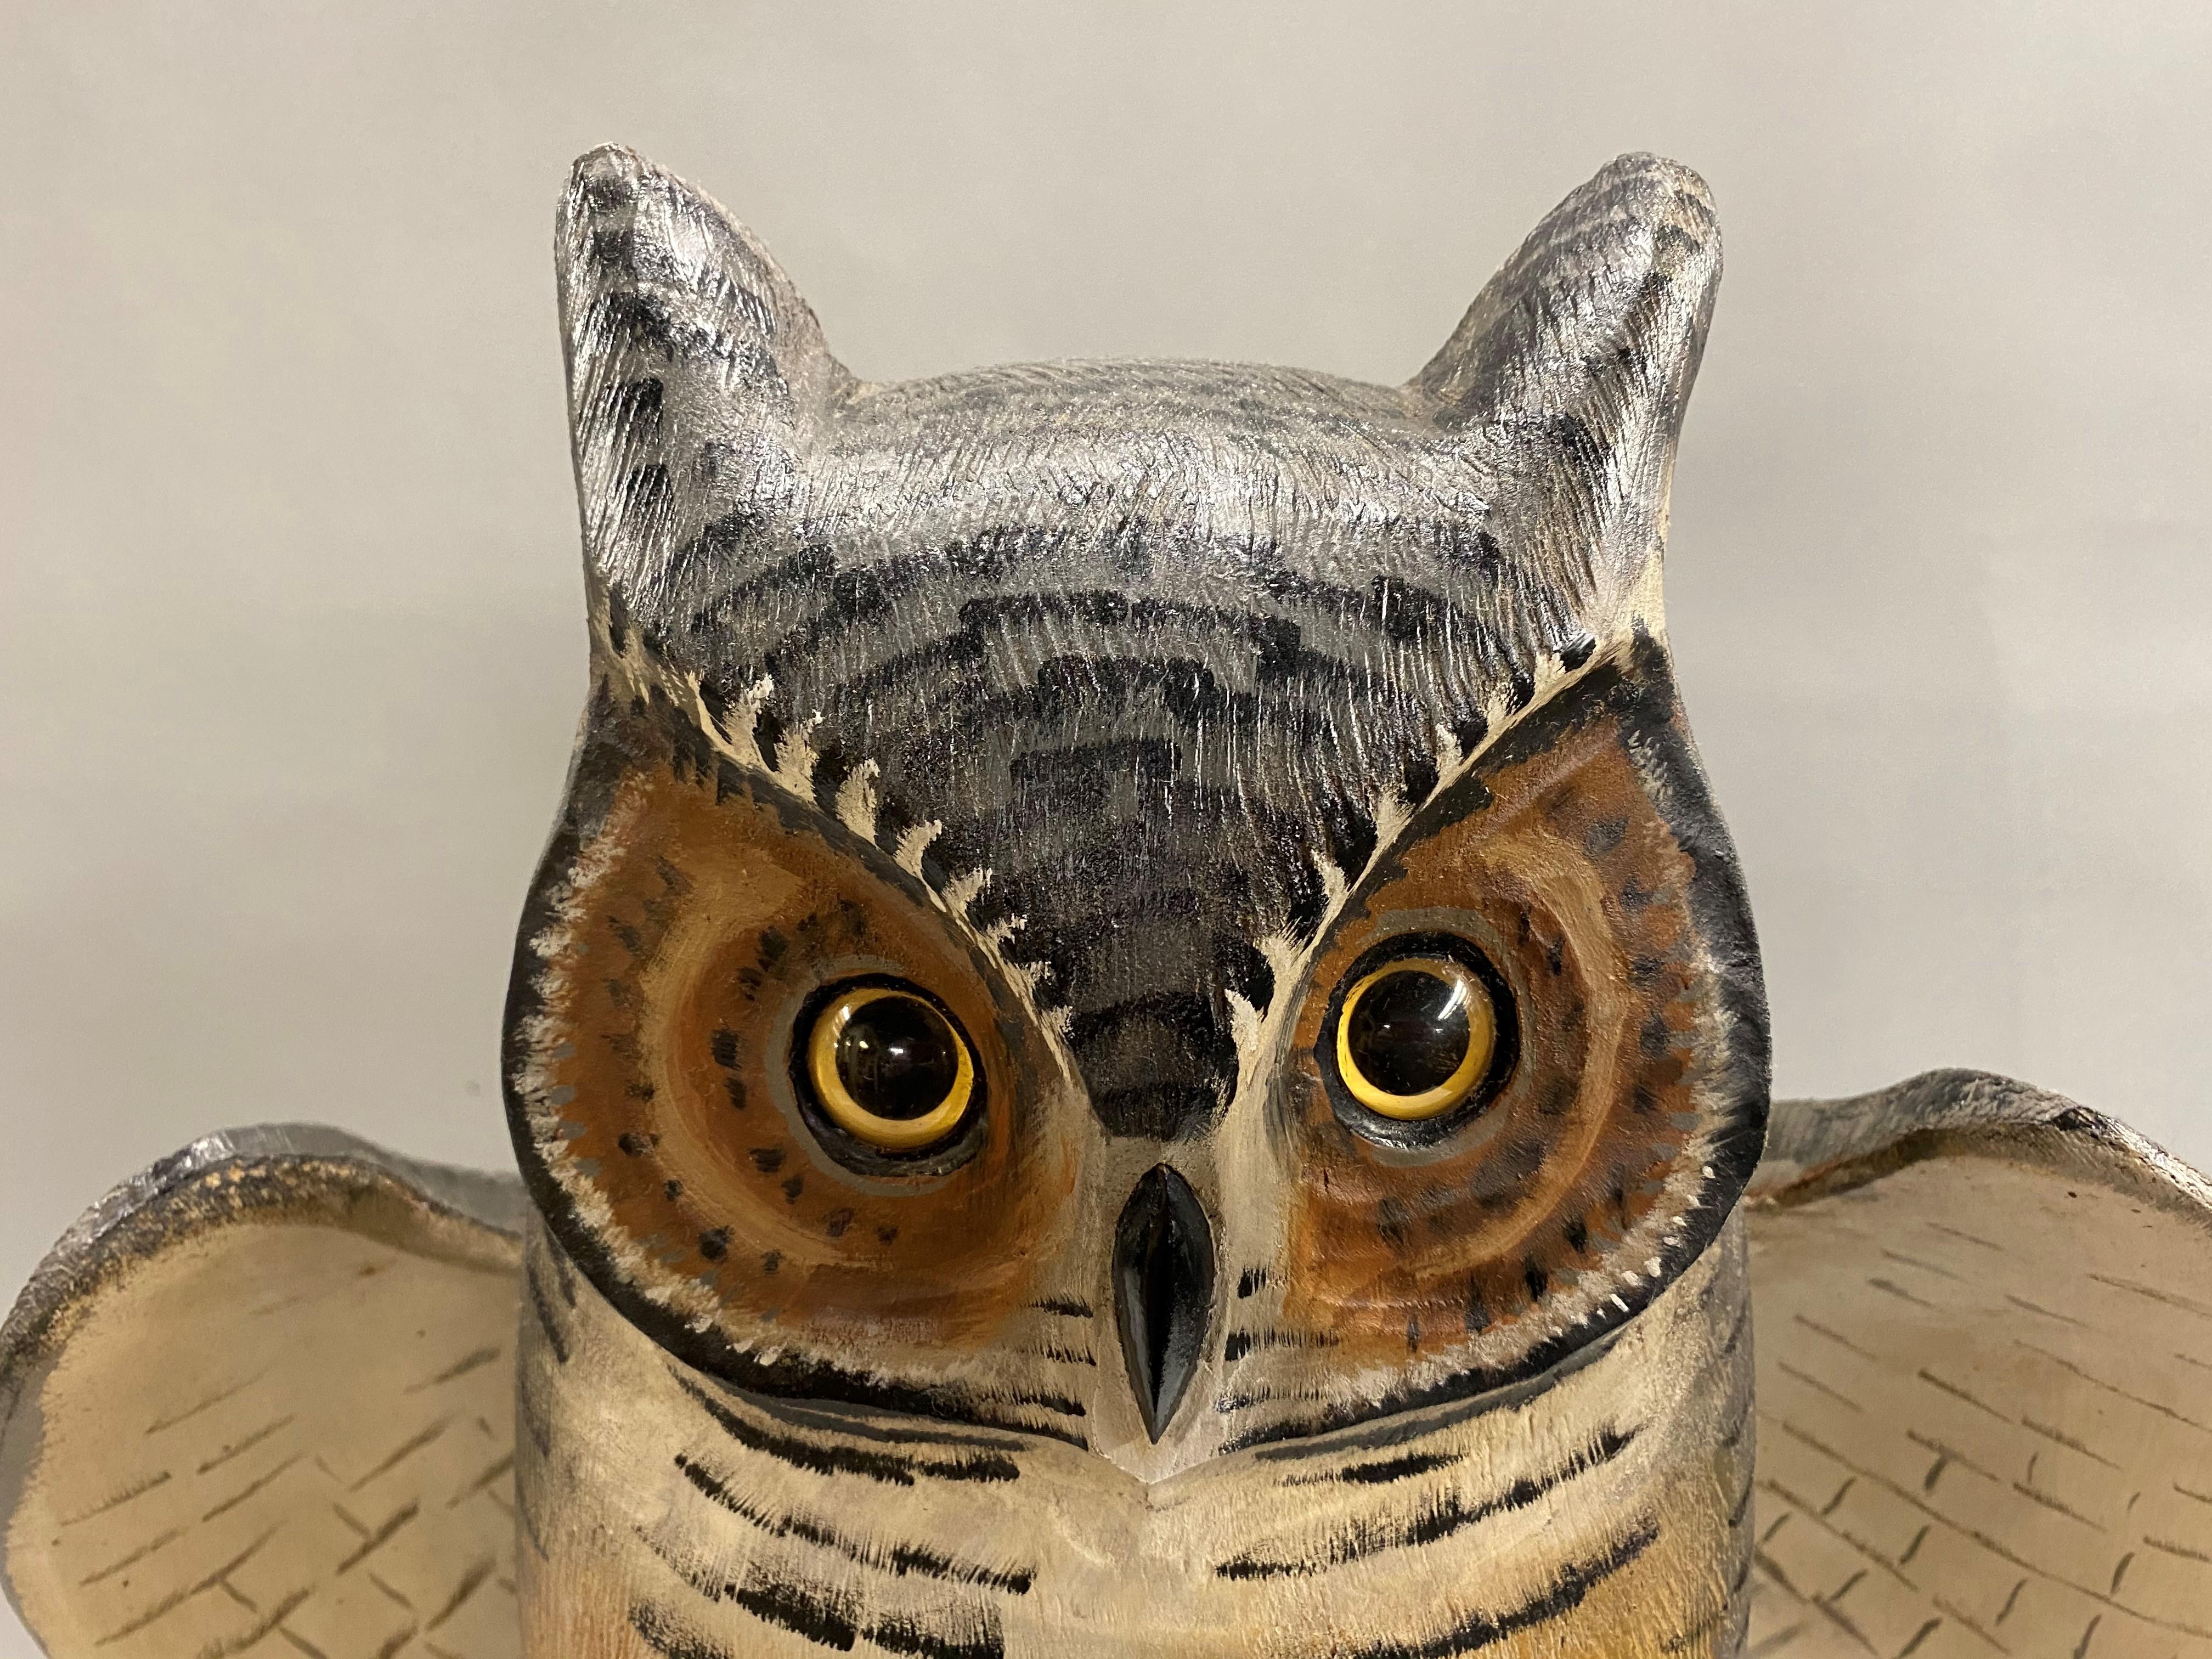 A splendid polychrome carved wooden great horned owl with hinged wings by American artist Mike Borrett (b. 1960). Borrett is a well known decoy carver from Madison, Wisconsin. This carved Great horned owl has glass eyes, nicely painted detail, and